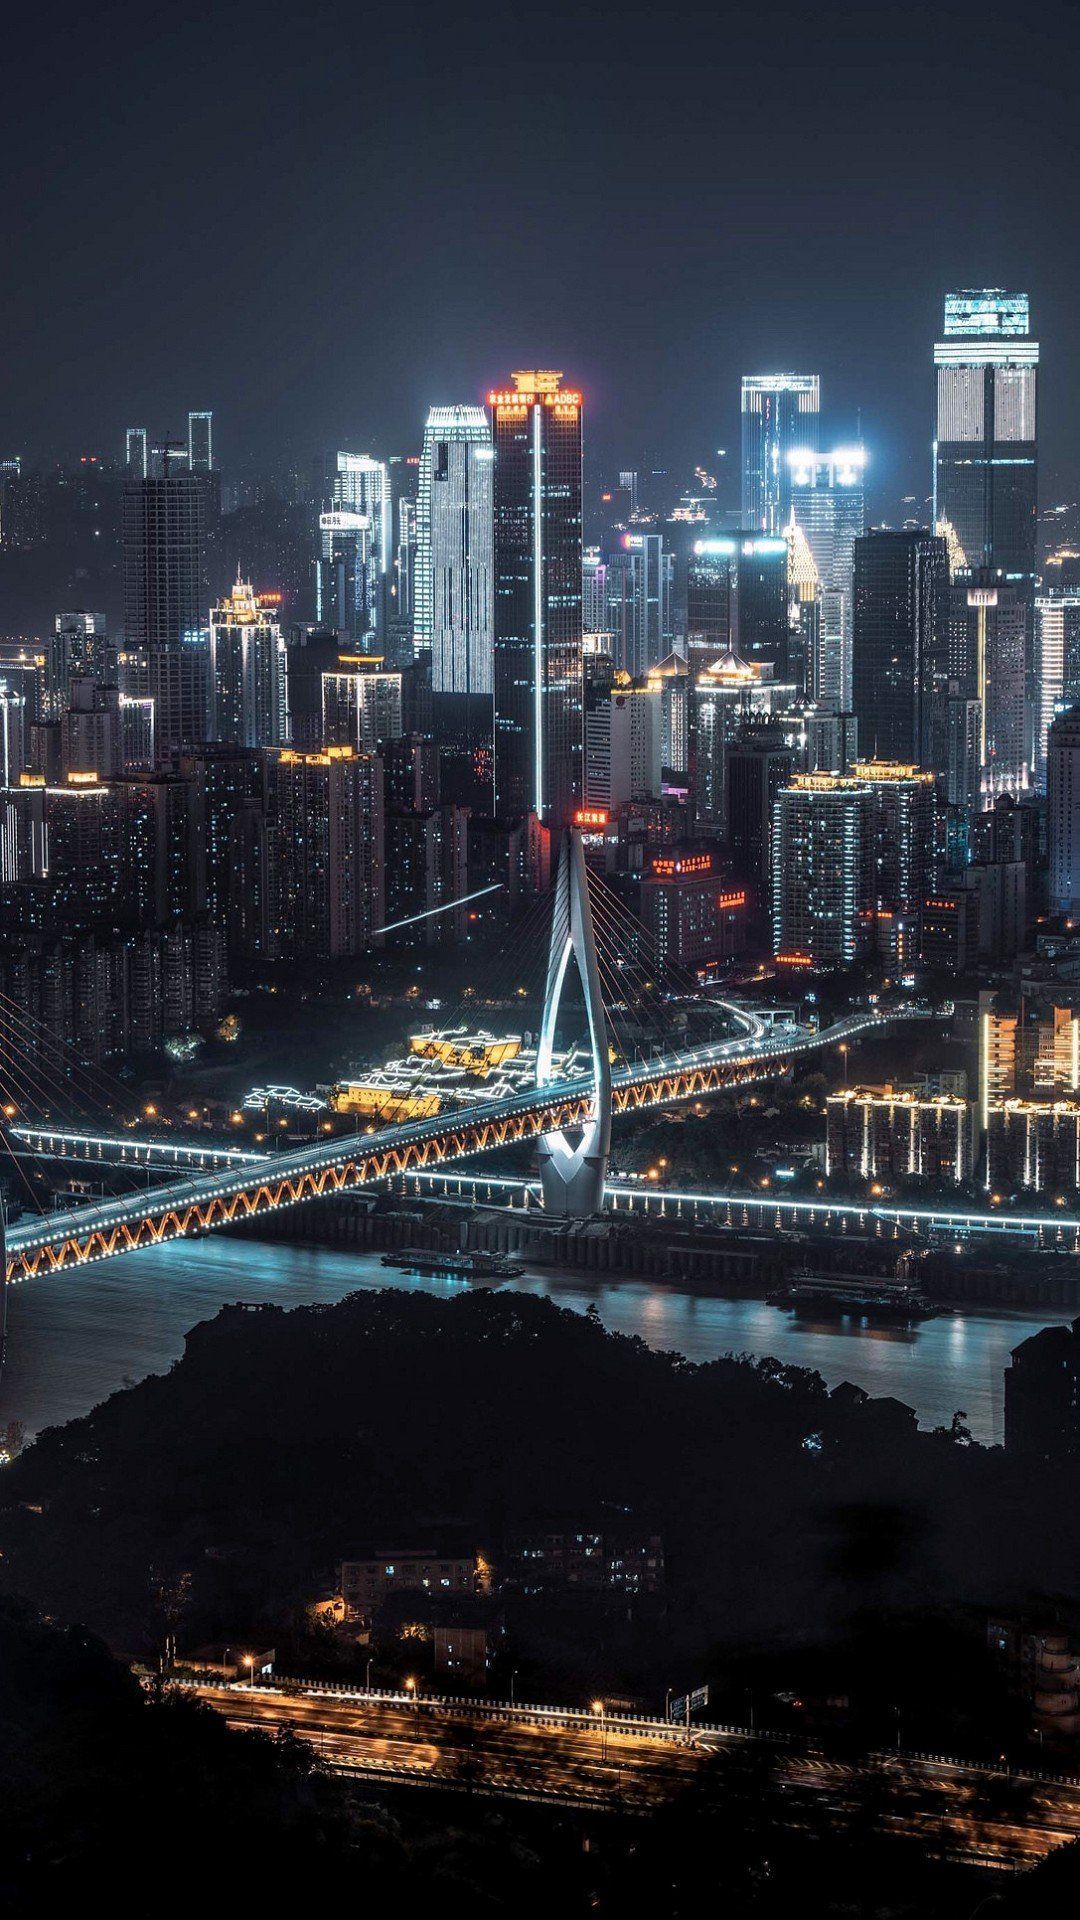 iPhone 11 Wallpaper Landscape Chongqing Seinta Night View. Beautiful places to travel, City picture, Landscape